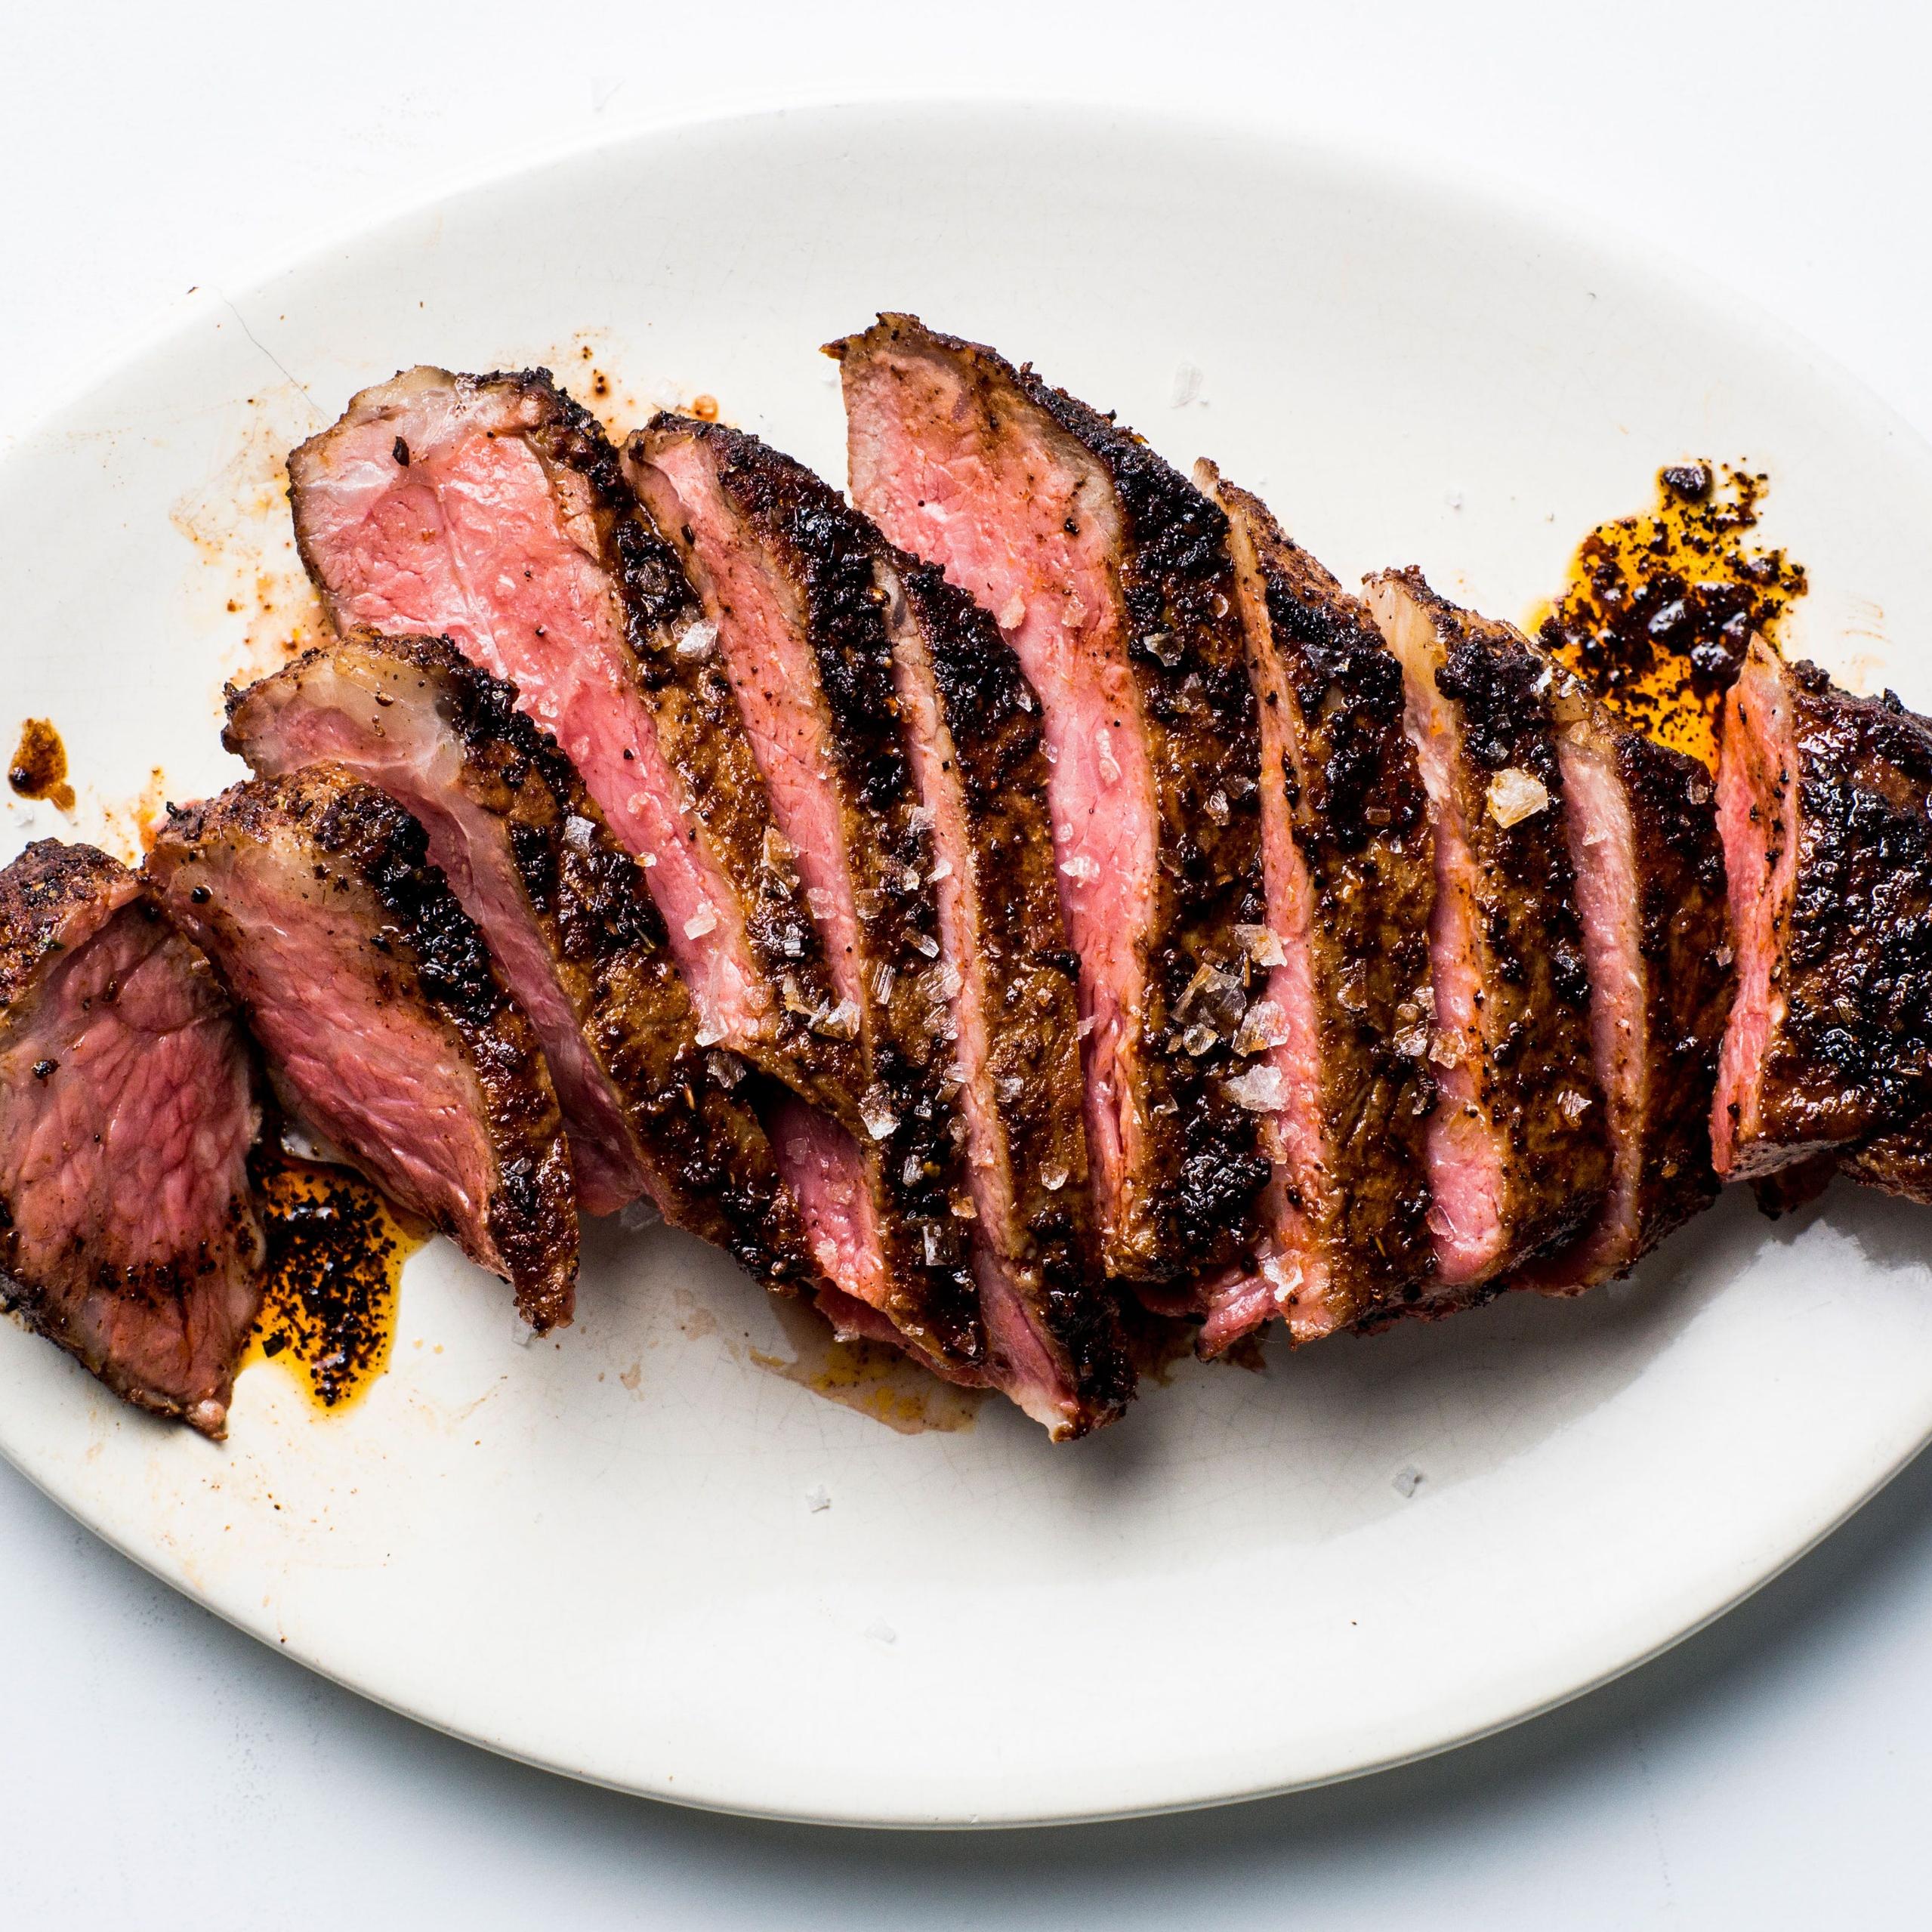 Perfectly Spiced Coffee Rub for Juicy Steak